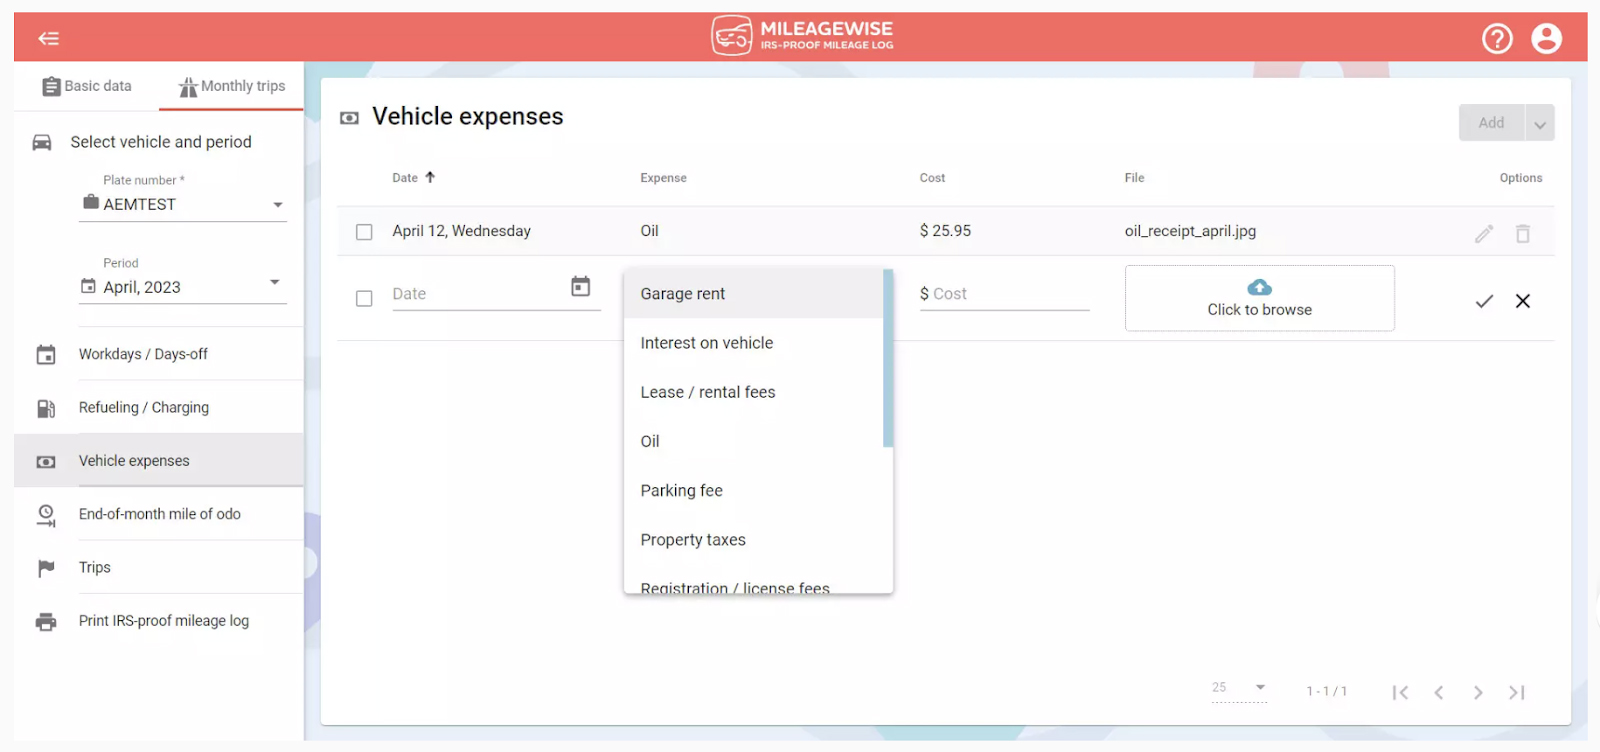 Image showing how to record an expense in MileageWise.